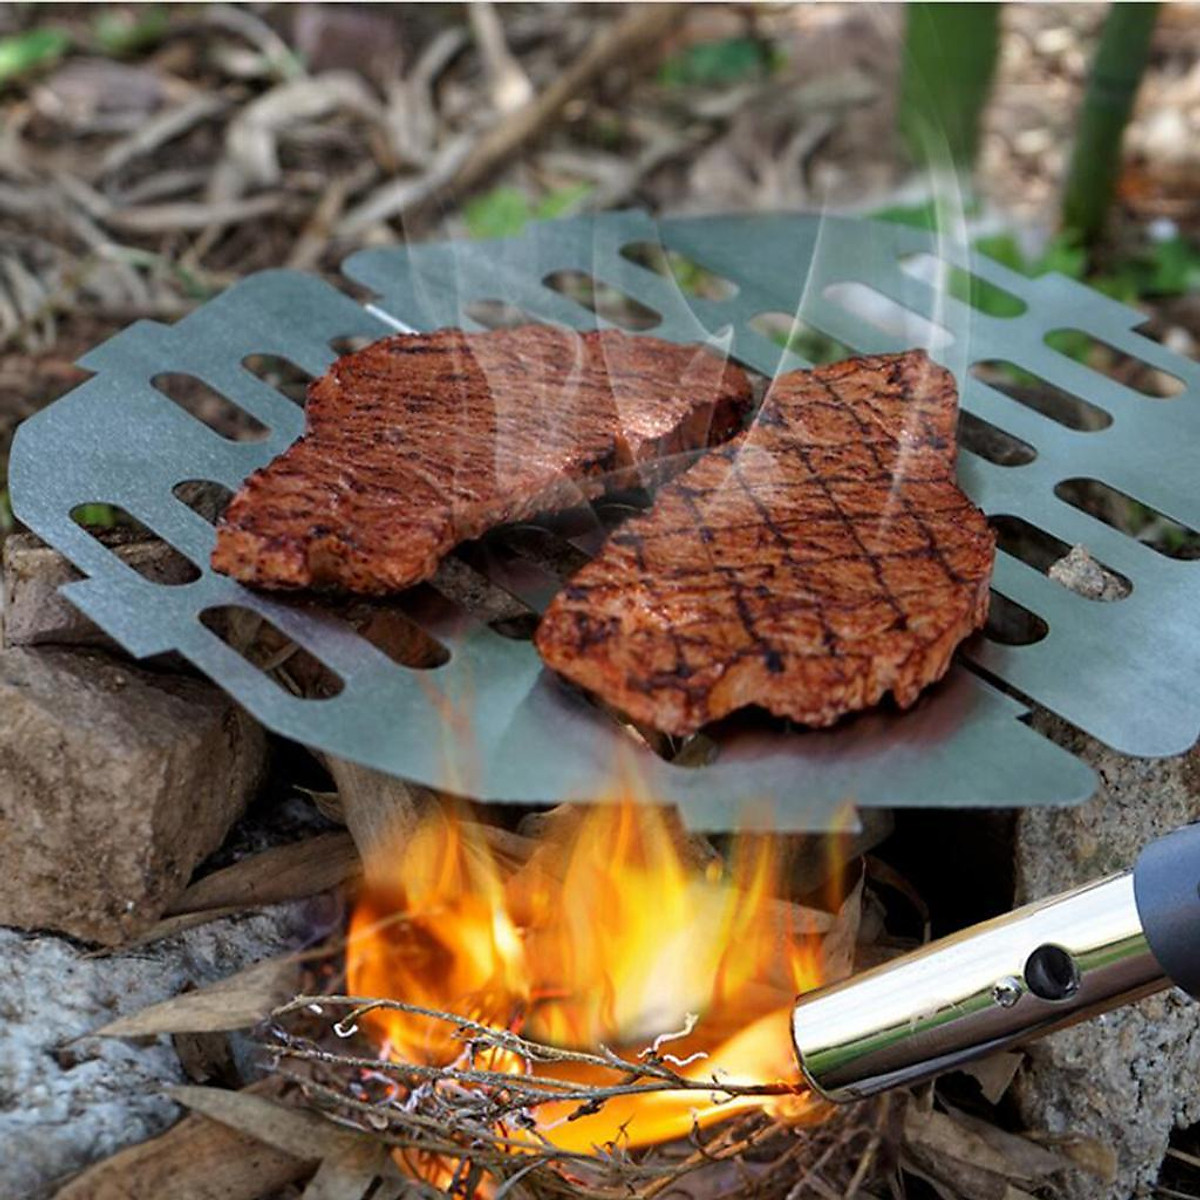 Portable Stovetop Grill Net Mini Foldable Furnace Grill Rack Barbecue Toast Baking Holder Heating Bracket Outdoor BBQ Cooking Tools